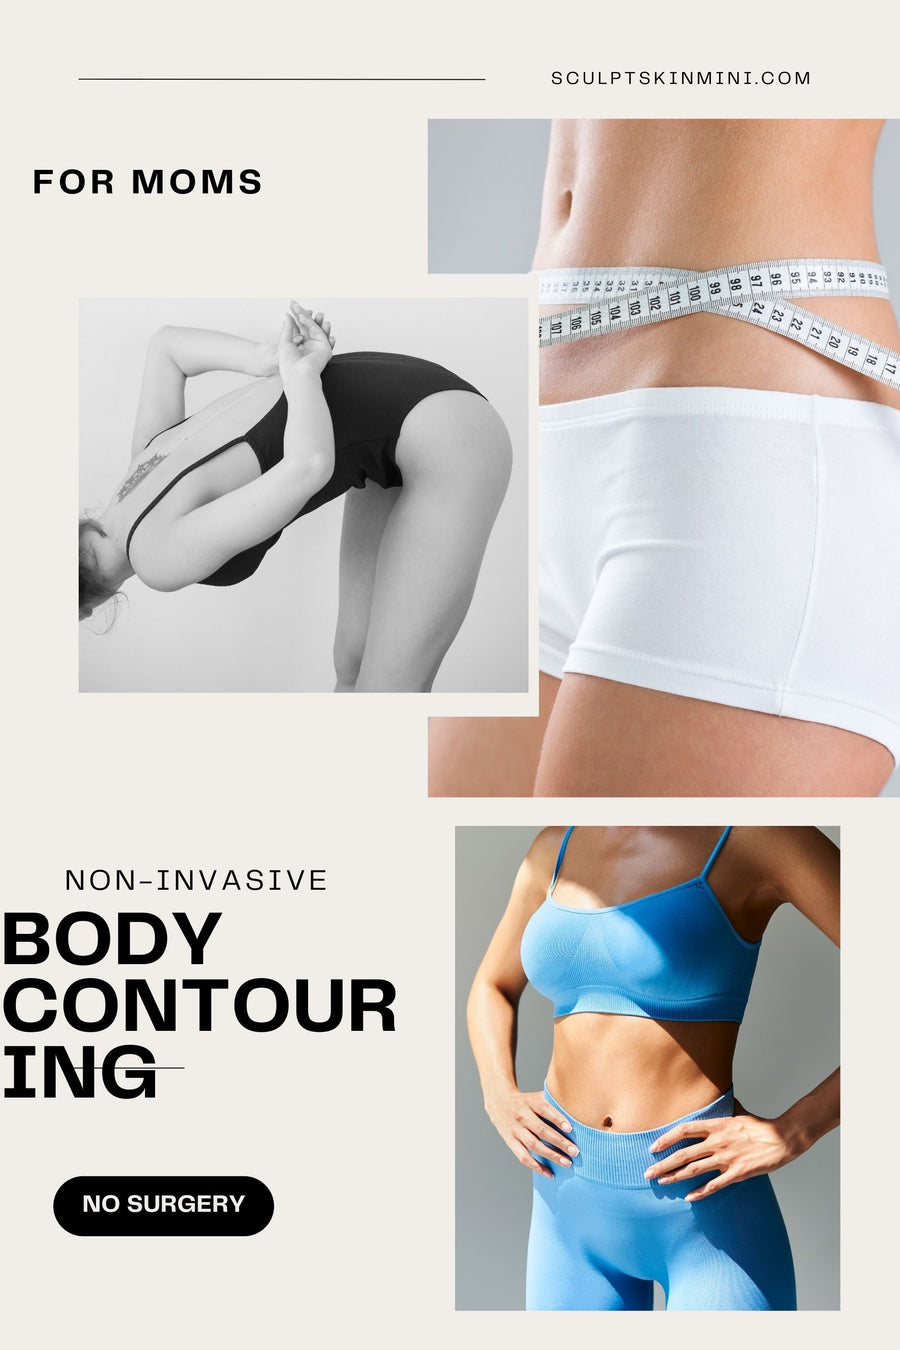 ultrasonic cavitation radio frequency skin tightening body sculpting machine fat reduction cellulite stretchmark skin tightening device machine  Maintaining Your Results After Ultrasonic Cavitation - SculptSkin